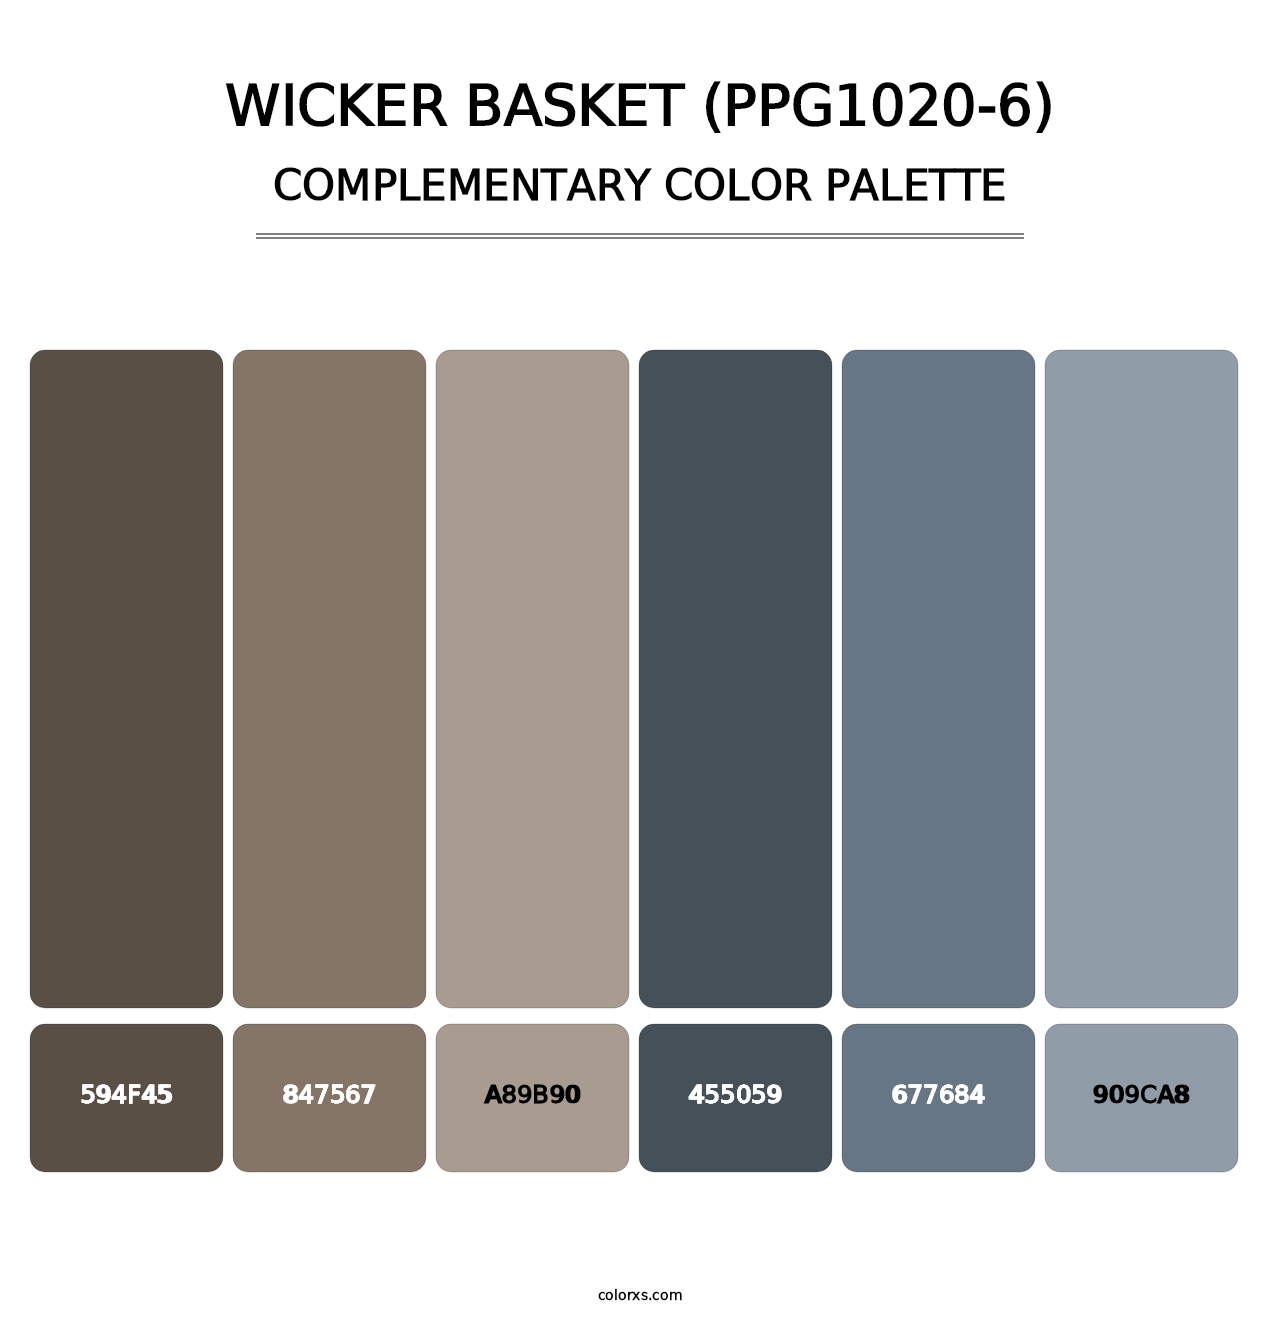 Wicker Basket (PPG1020-6) - Complementary Color Palette